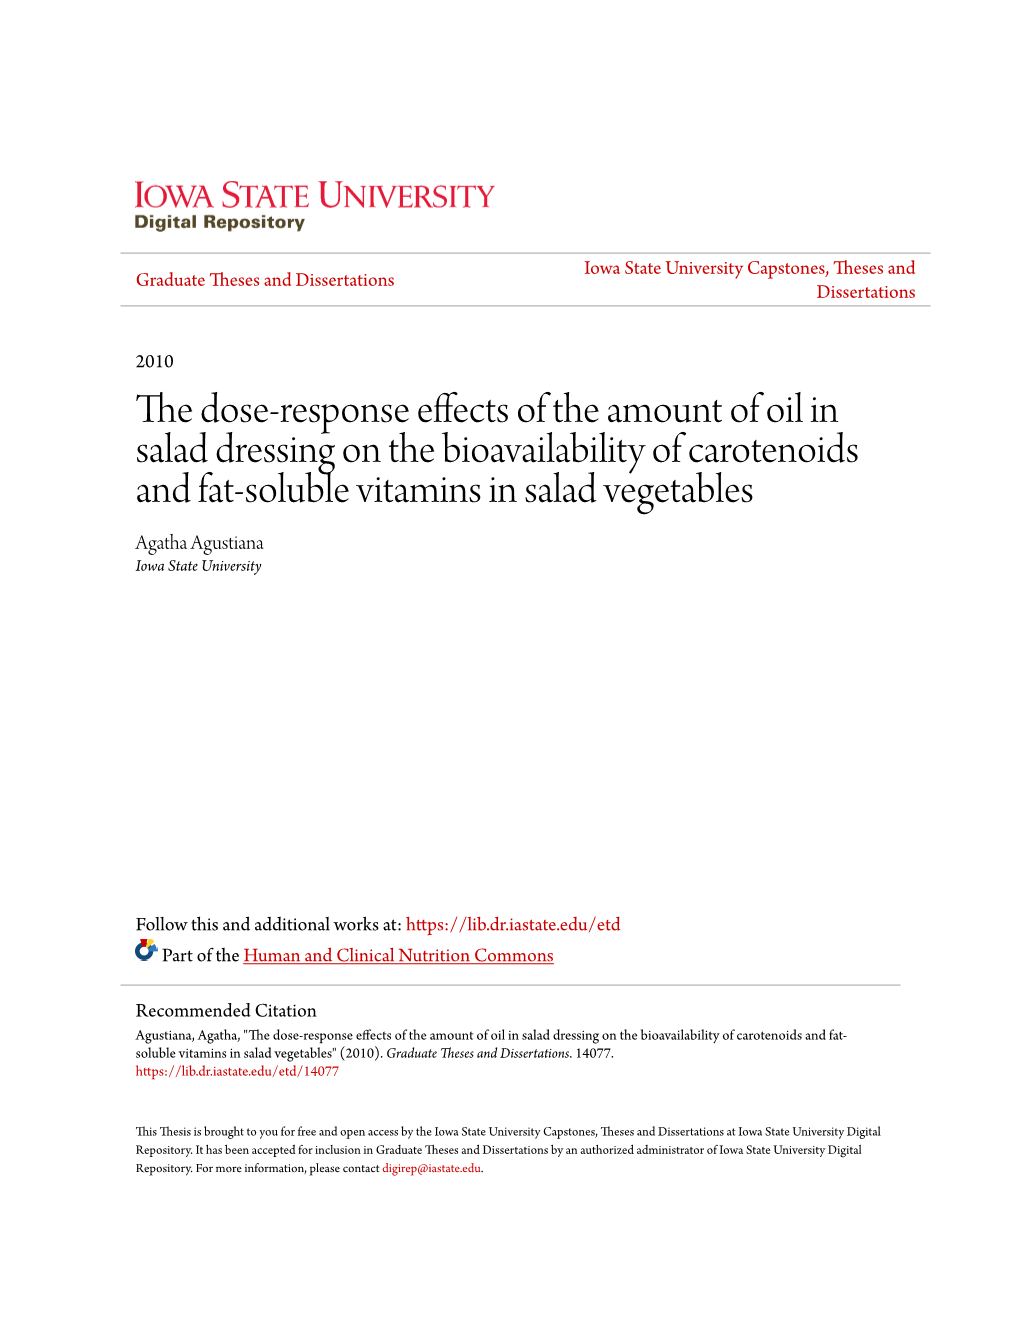 The Dose-Response Effects of the Amount of Oil in Salad Dressing On